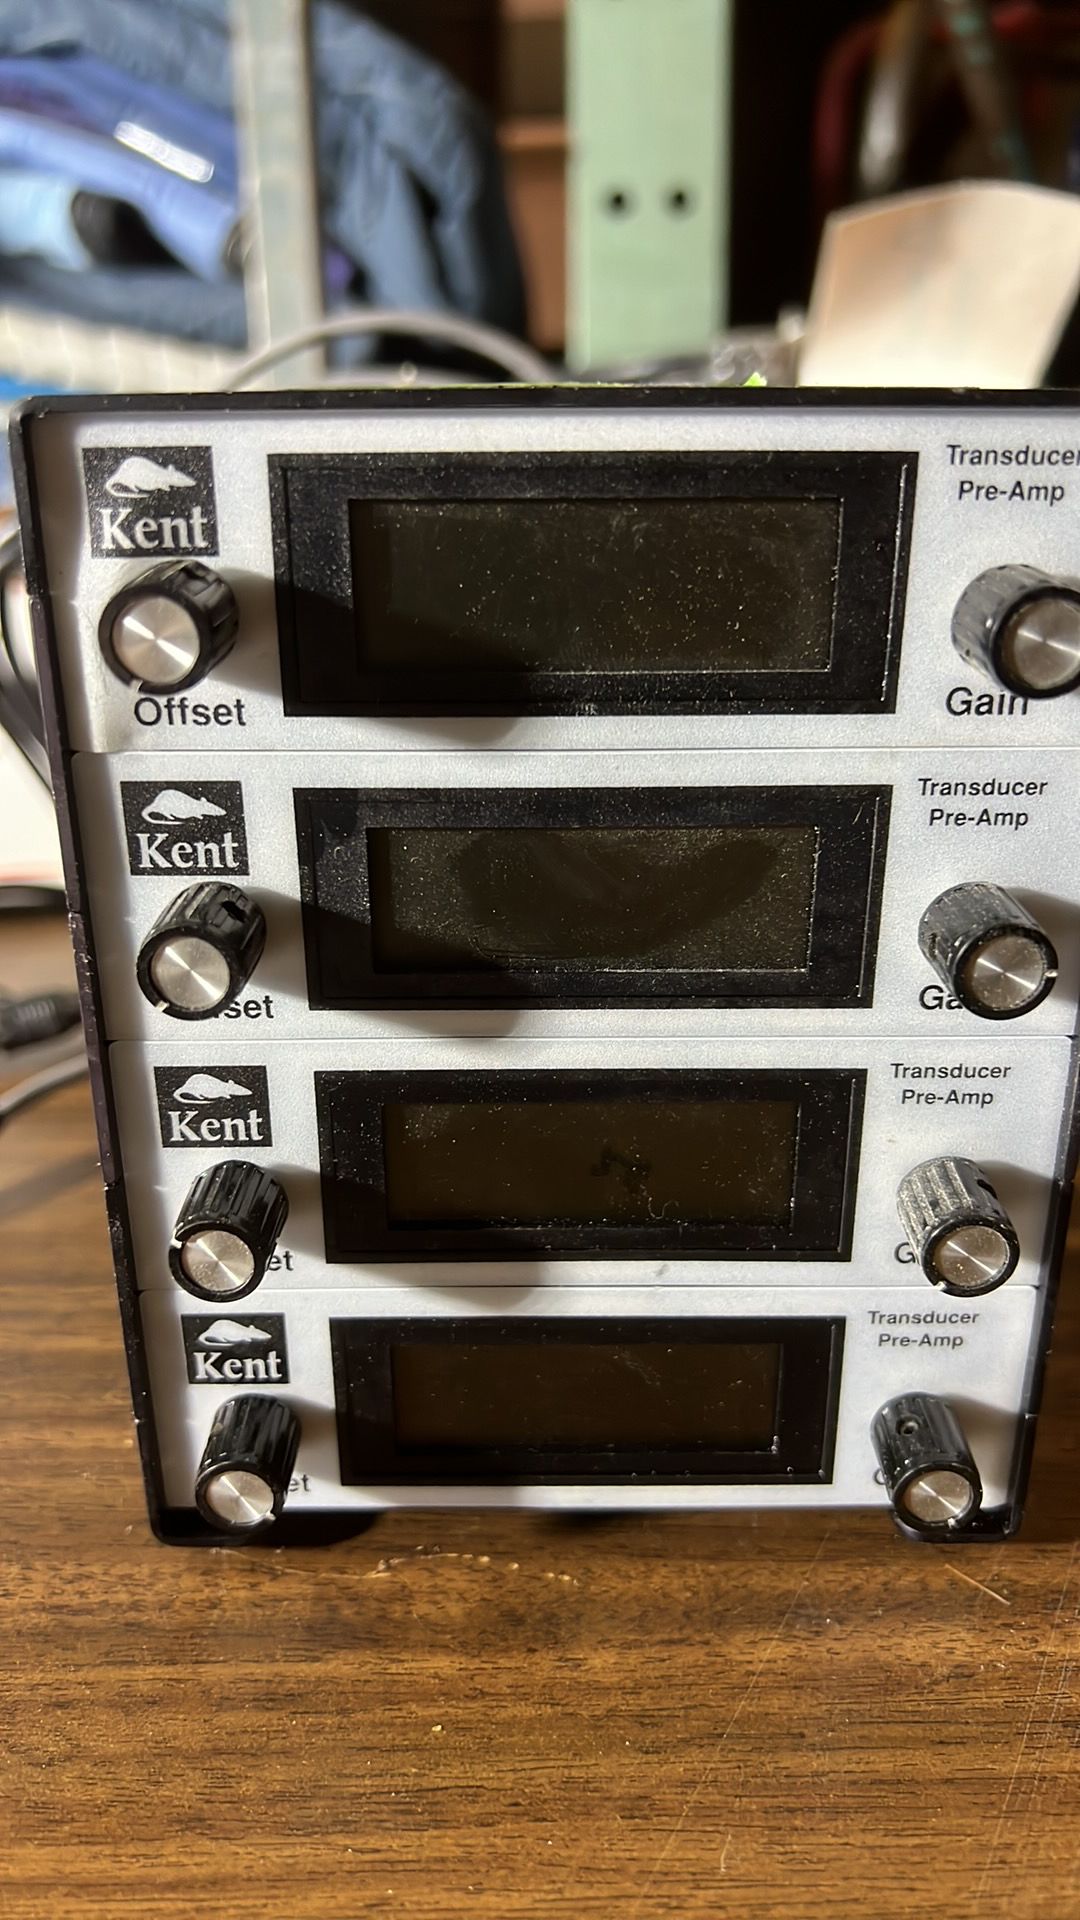 KENT SCIENTIFIC transducer, one unit with 4 transducer pre-amps - Image 2 of 4